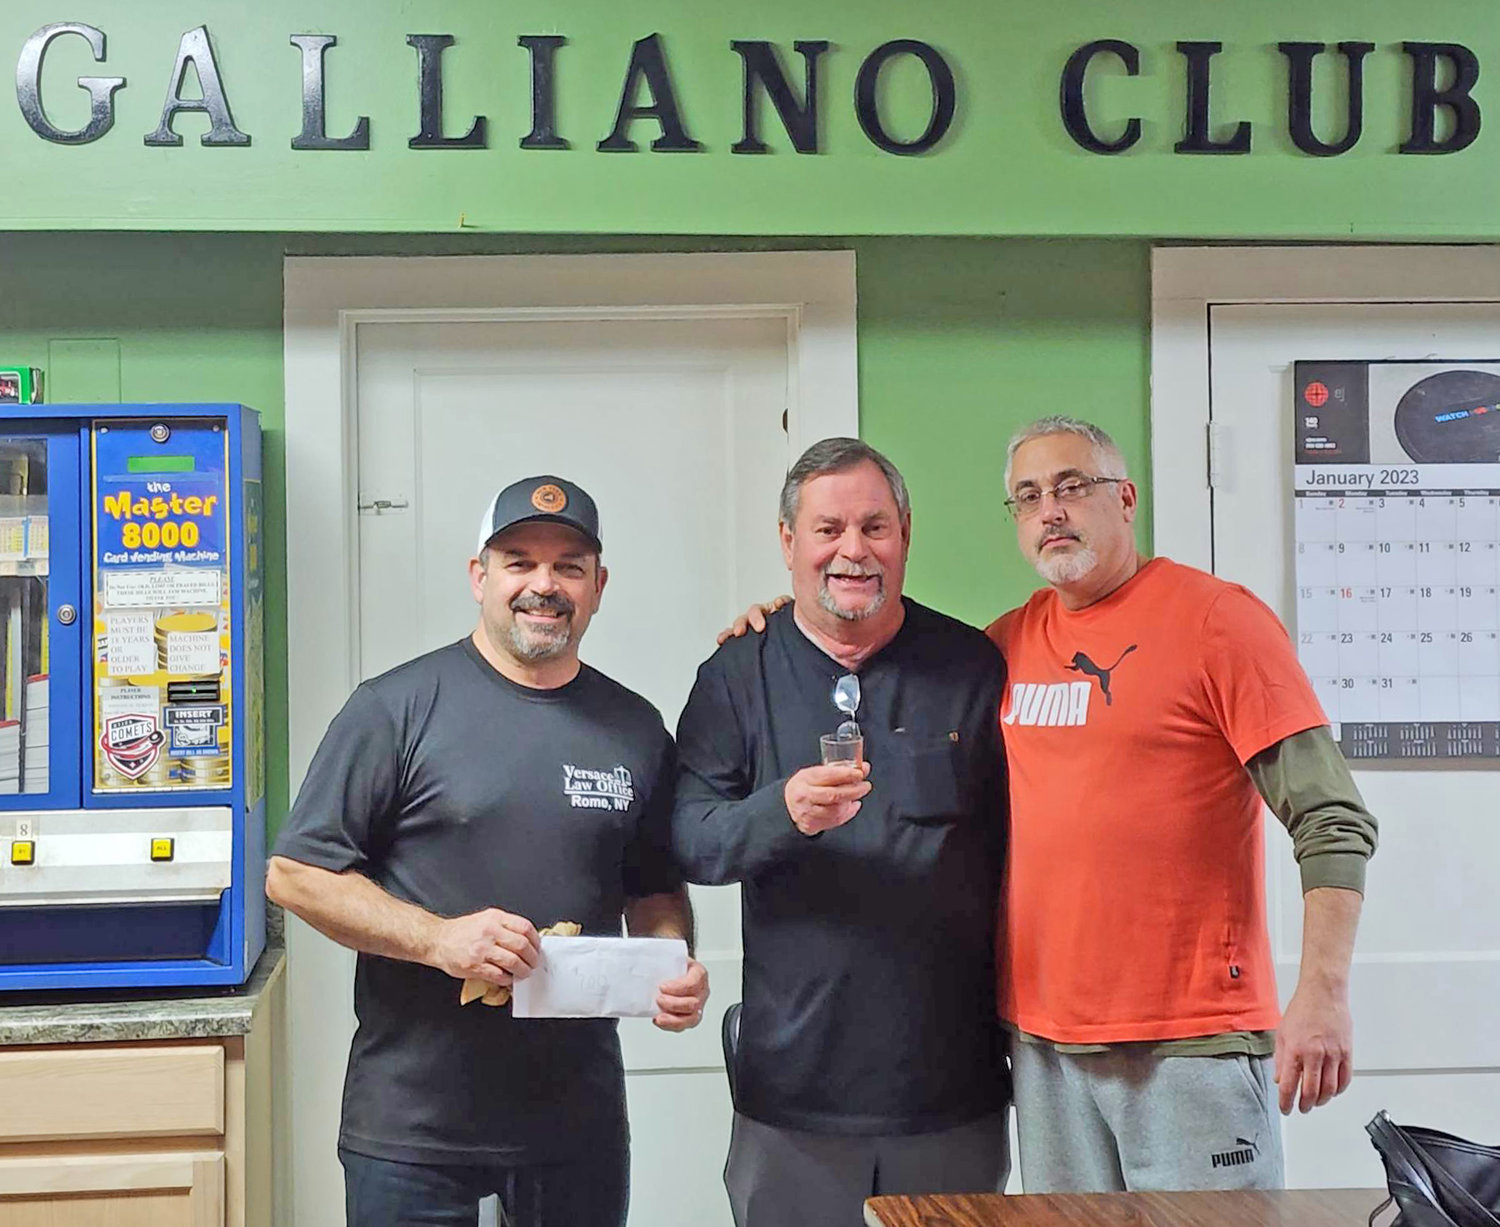 Team Loreto won the seventh annual Dan Loreto Men’s Doubles Bocce Tournament at the Galliano Club in Rome over the weekend. From left, Jimmy Guy of Team Loreto, Dan Loreto and Greg Puccio of Team Loreto.